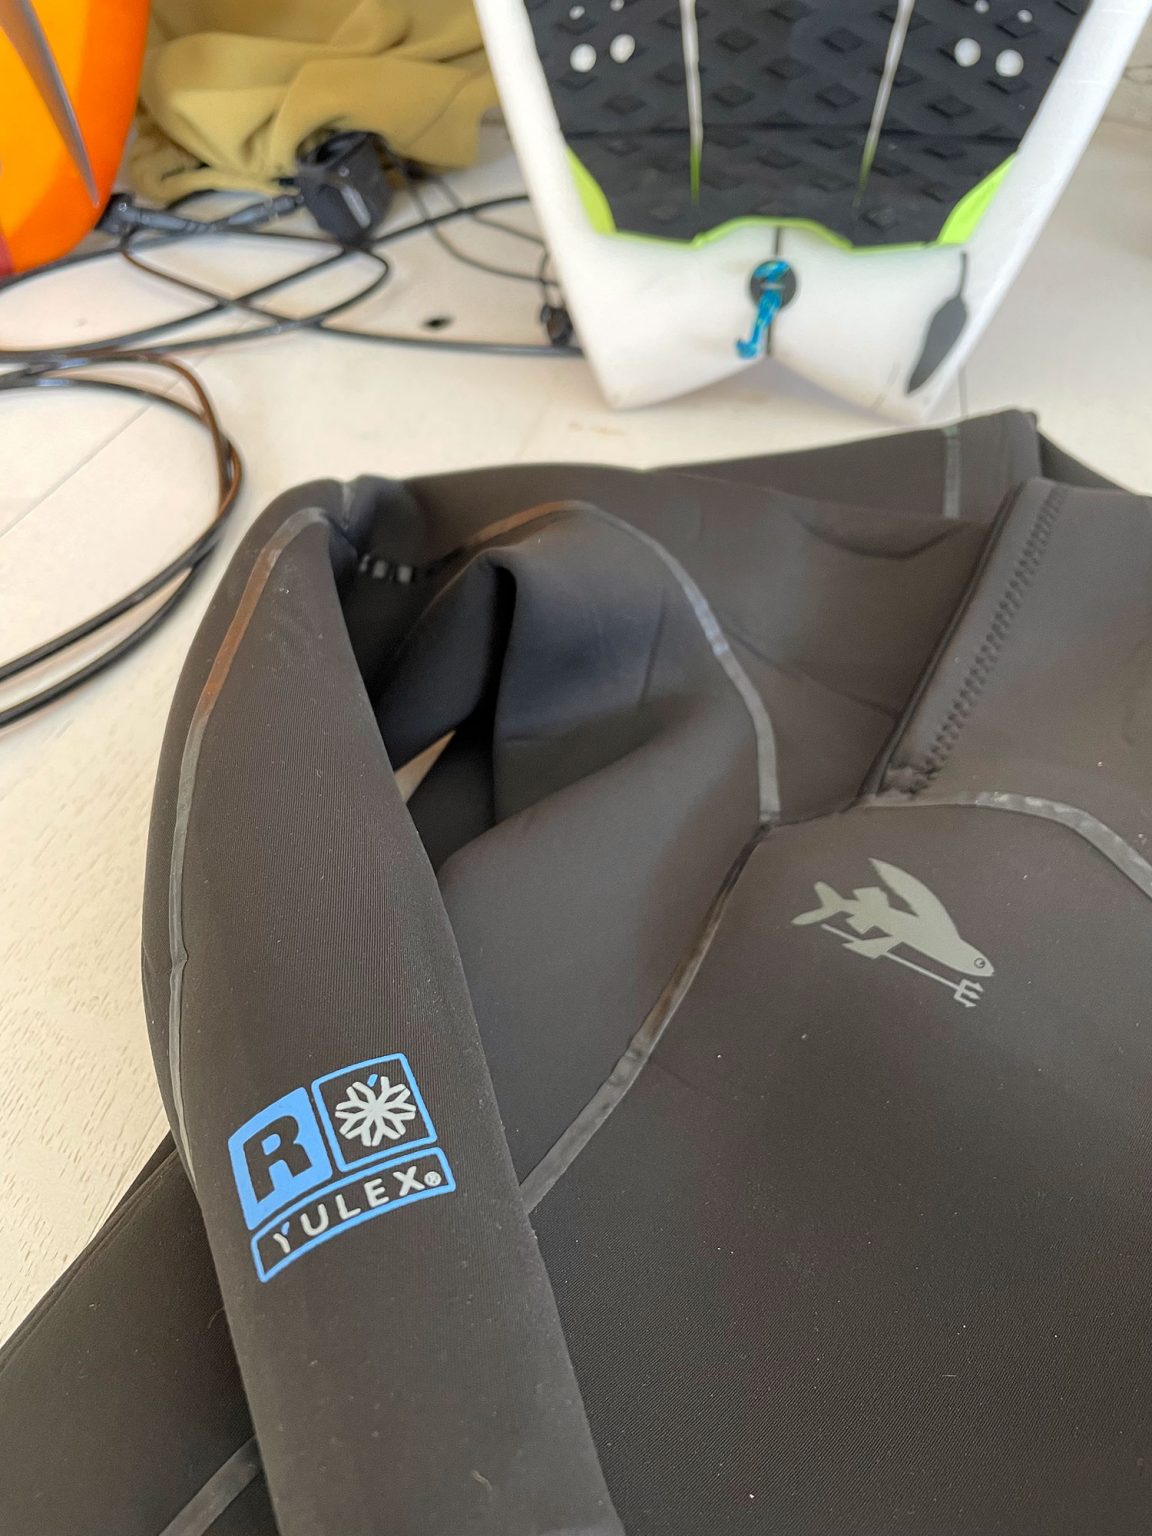 Patagonia R1 Wetsuit Review – Empire Ave